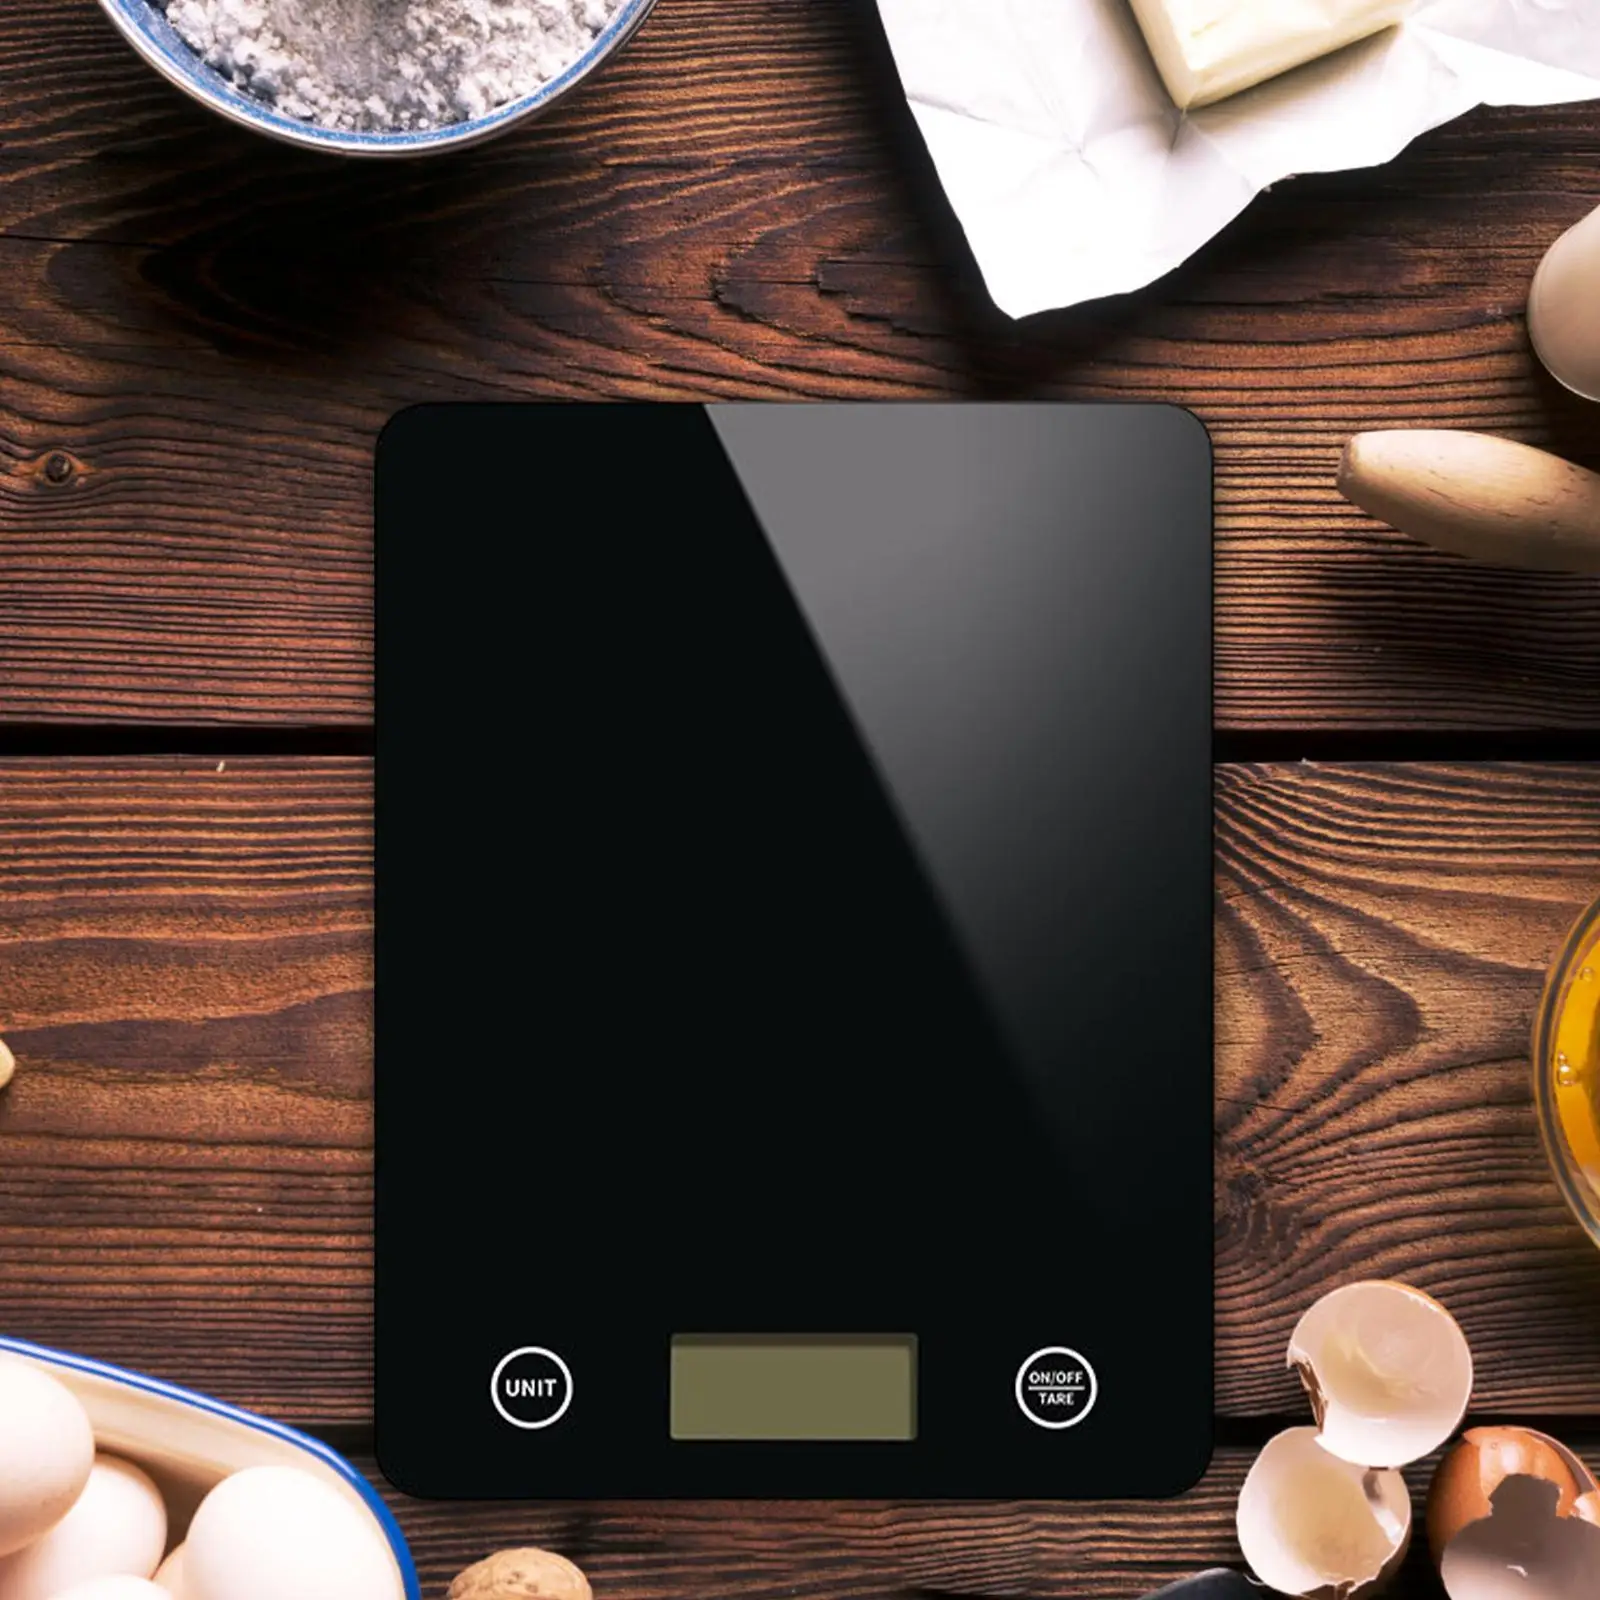 Drip Coffee Scale 5kg/1G with Back Lit LCD Display Espresso Scale Food Scale